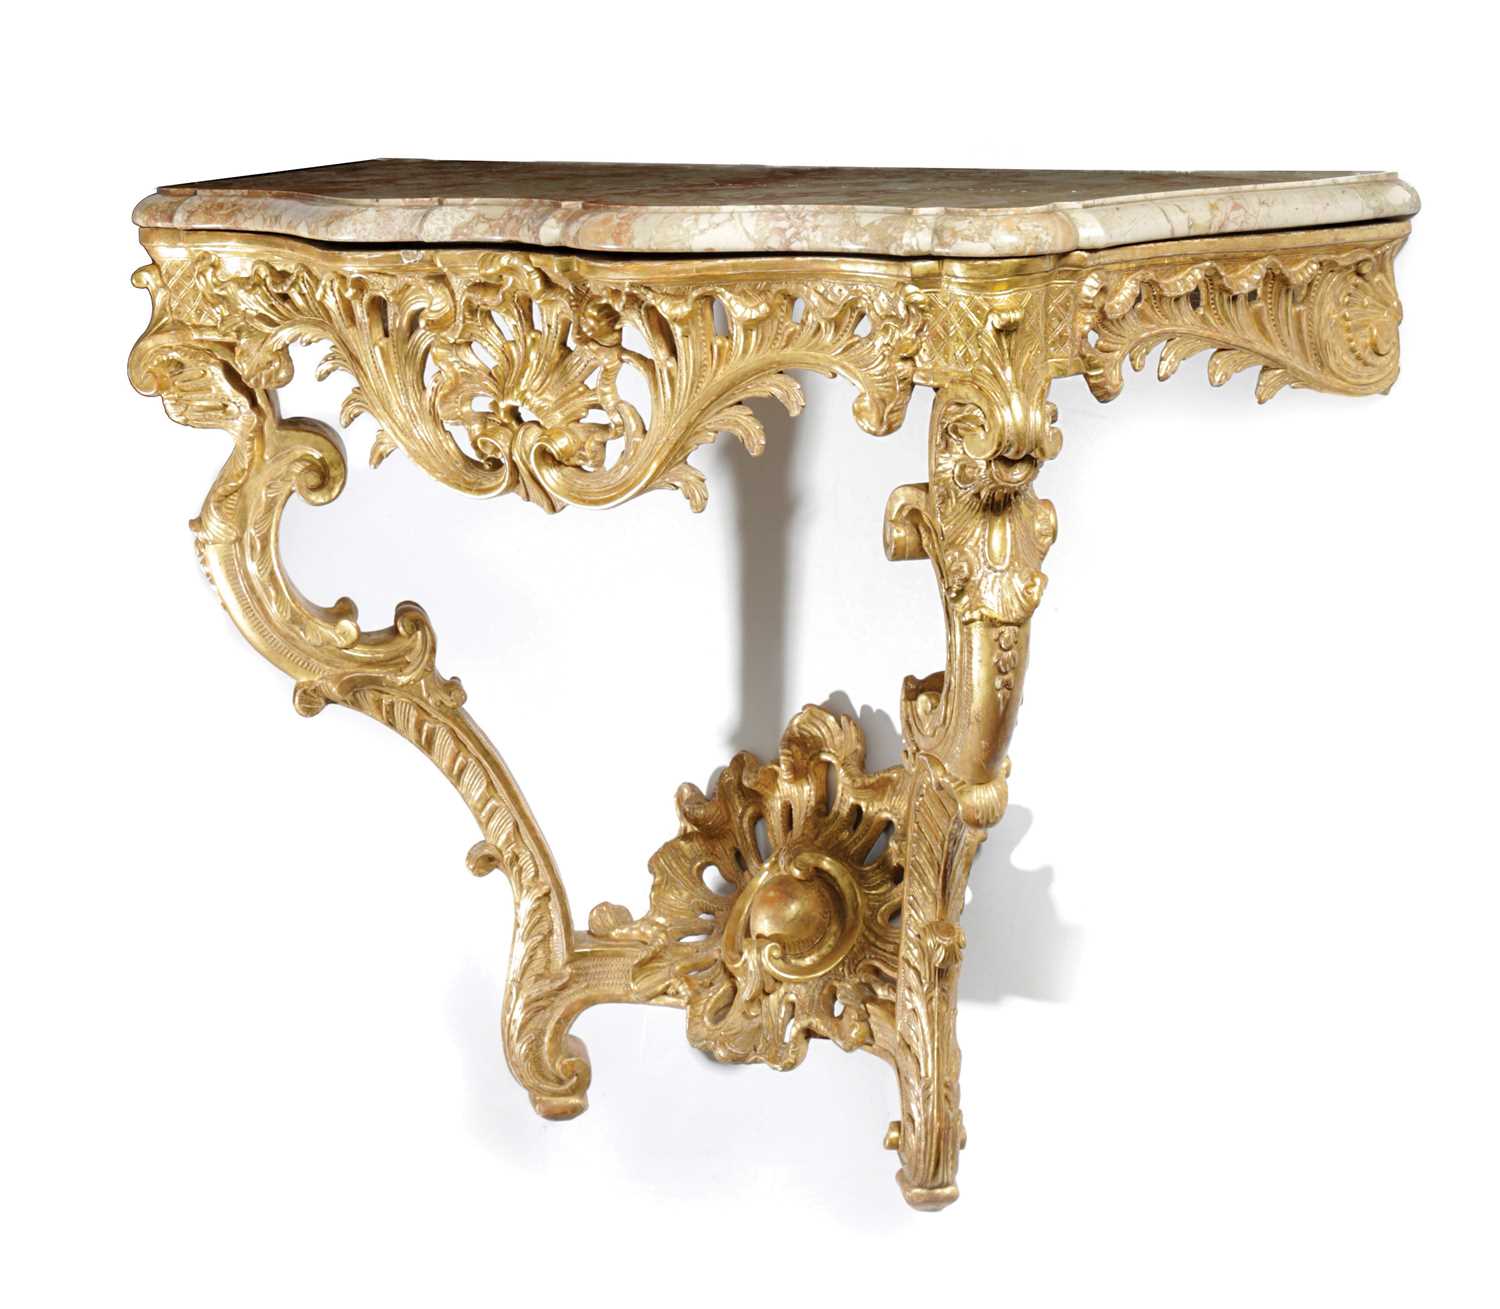 A GEORGE II GILTWOOD CONSOLE TABLE C.1755-60 in the French manner, the pink mottled marble top